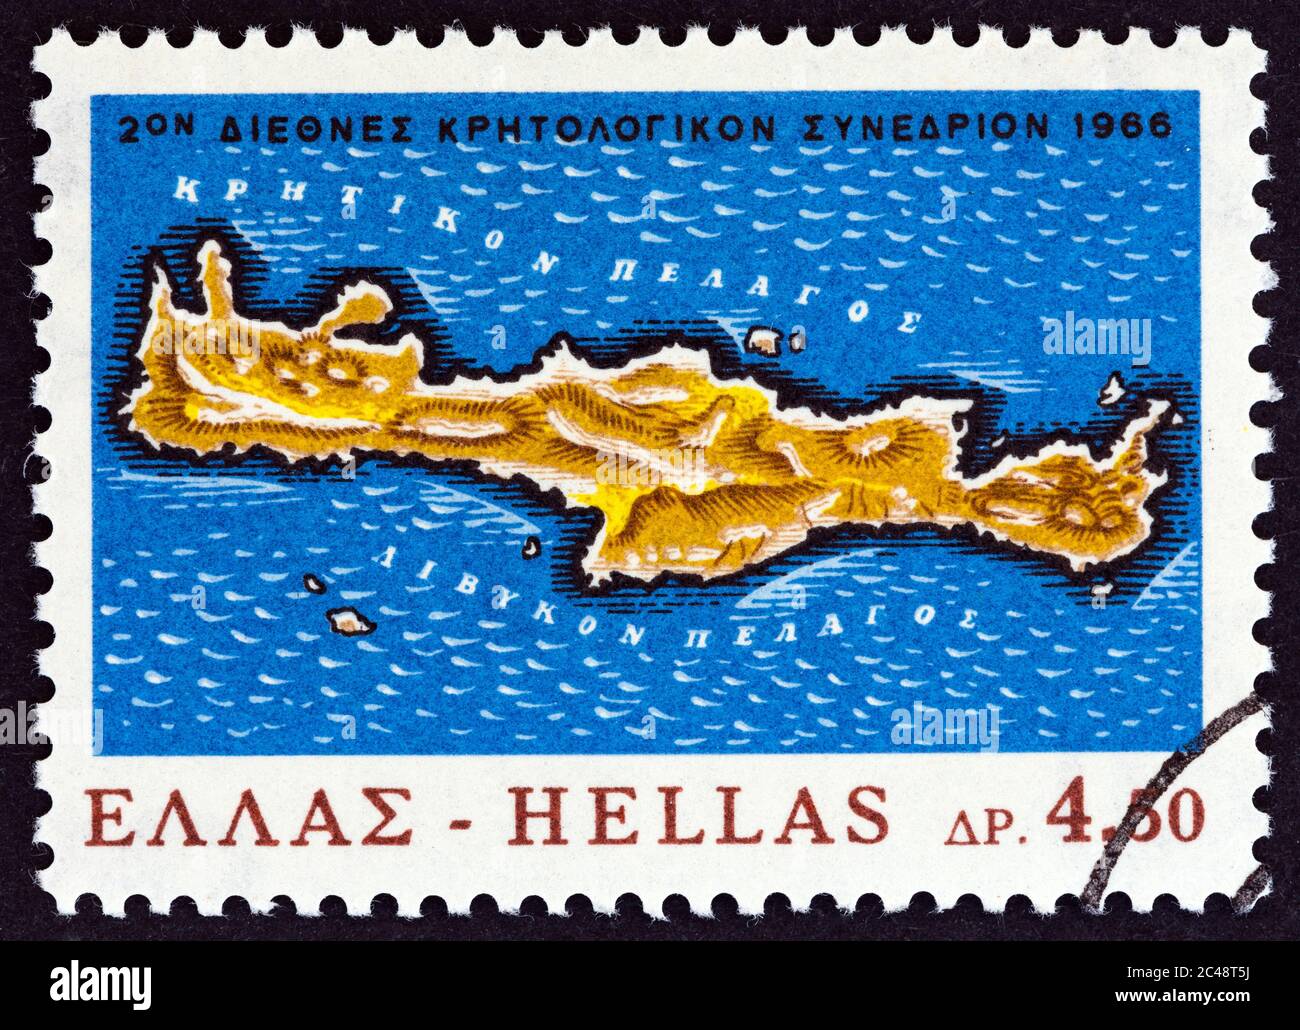 GREECE - CIRCA 1966: A stamp printed in Greece from the 'Centenary of Cretan Revolt' issue shows map of Crete, circa 1966. Stock Photo